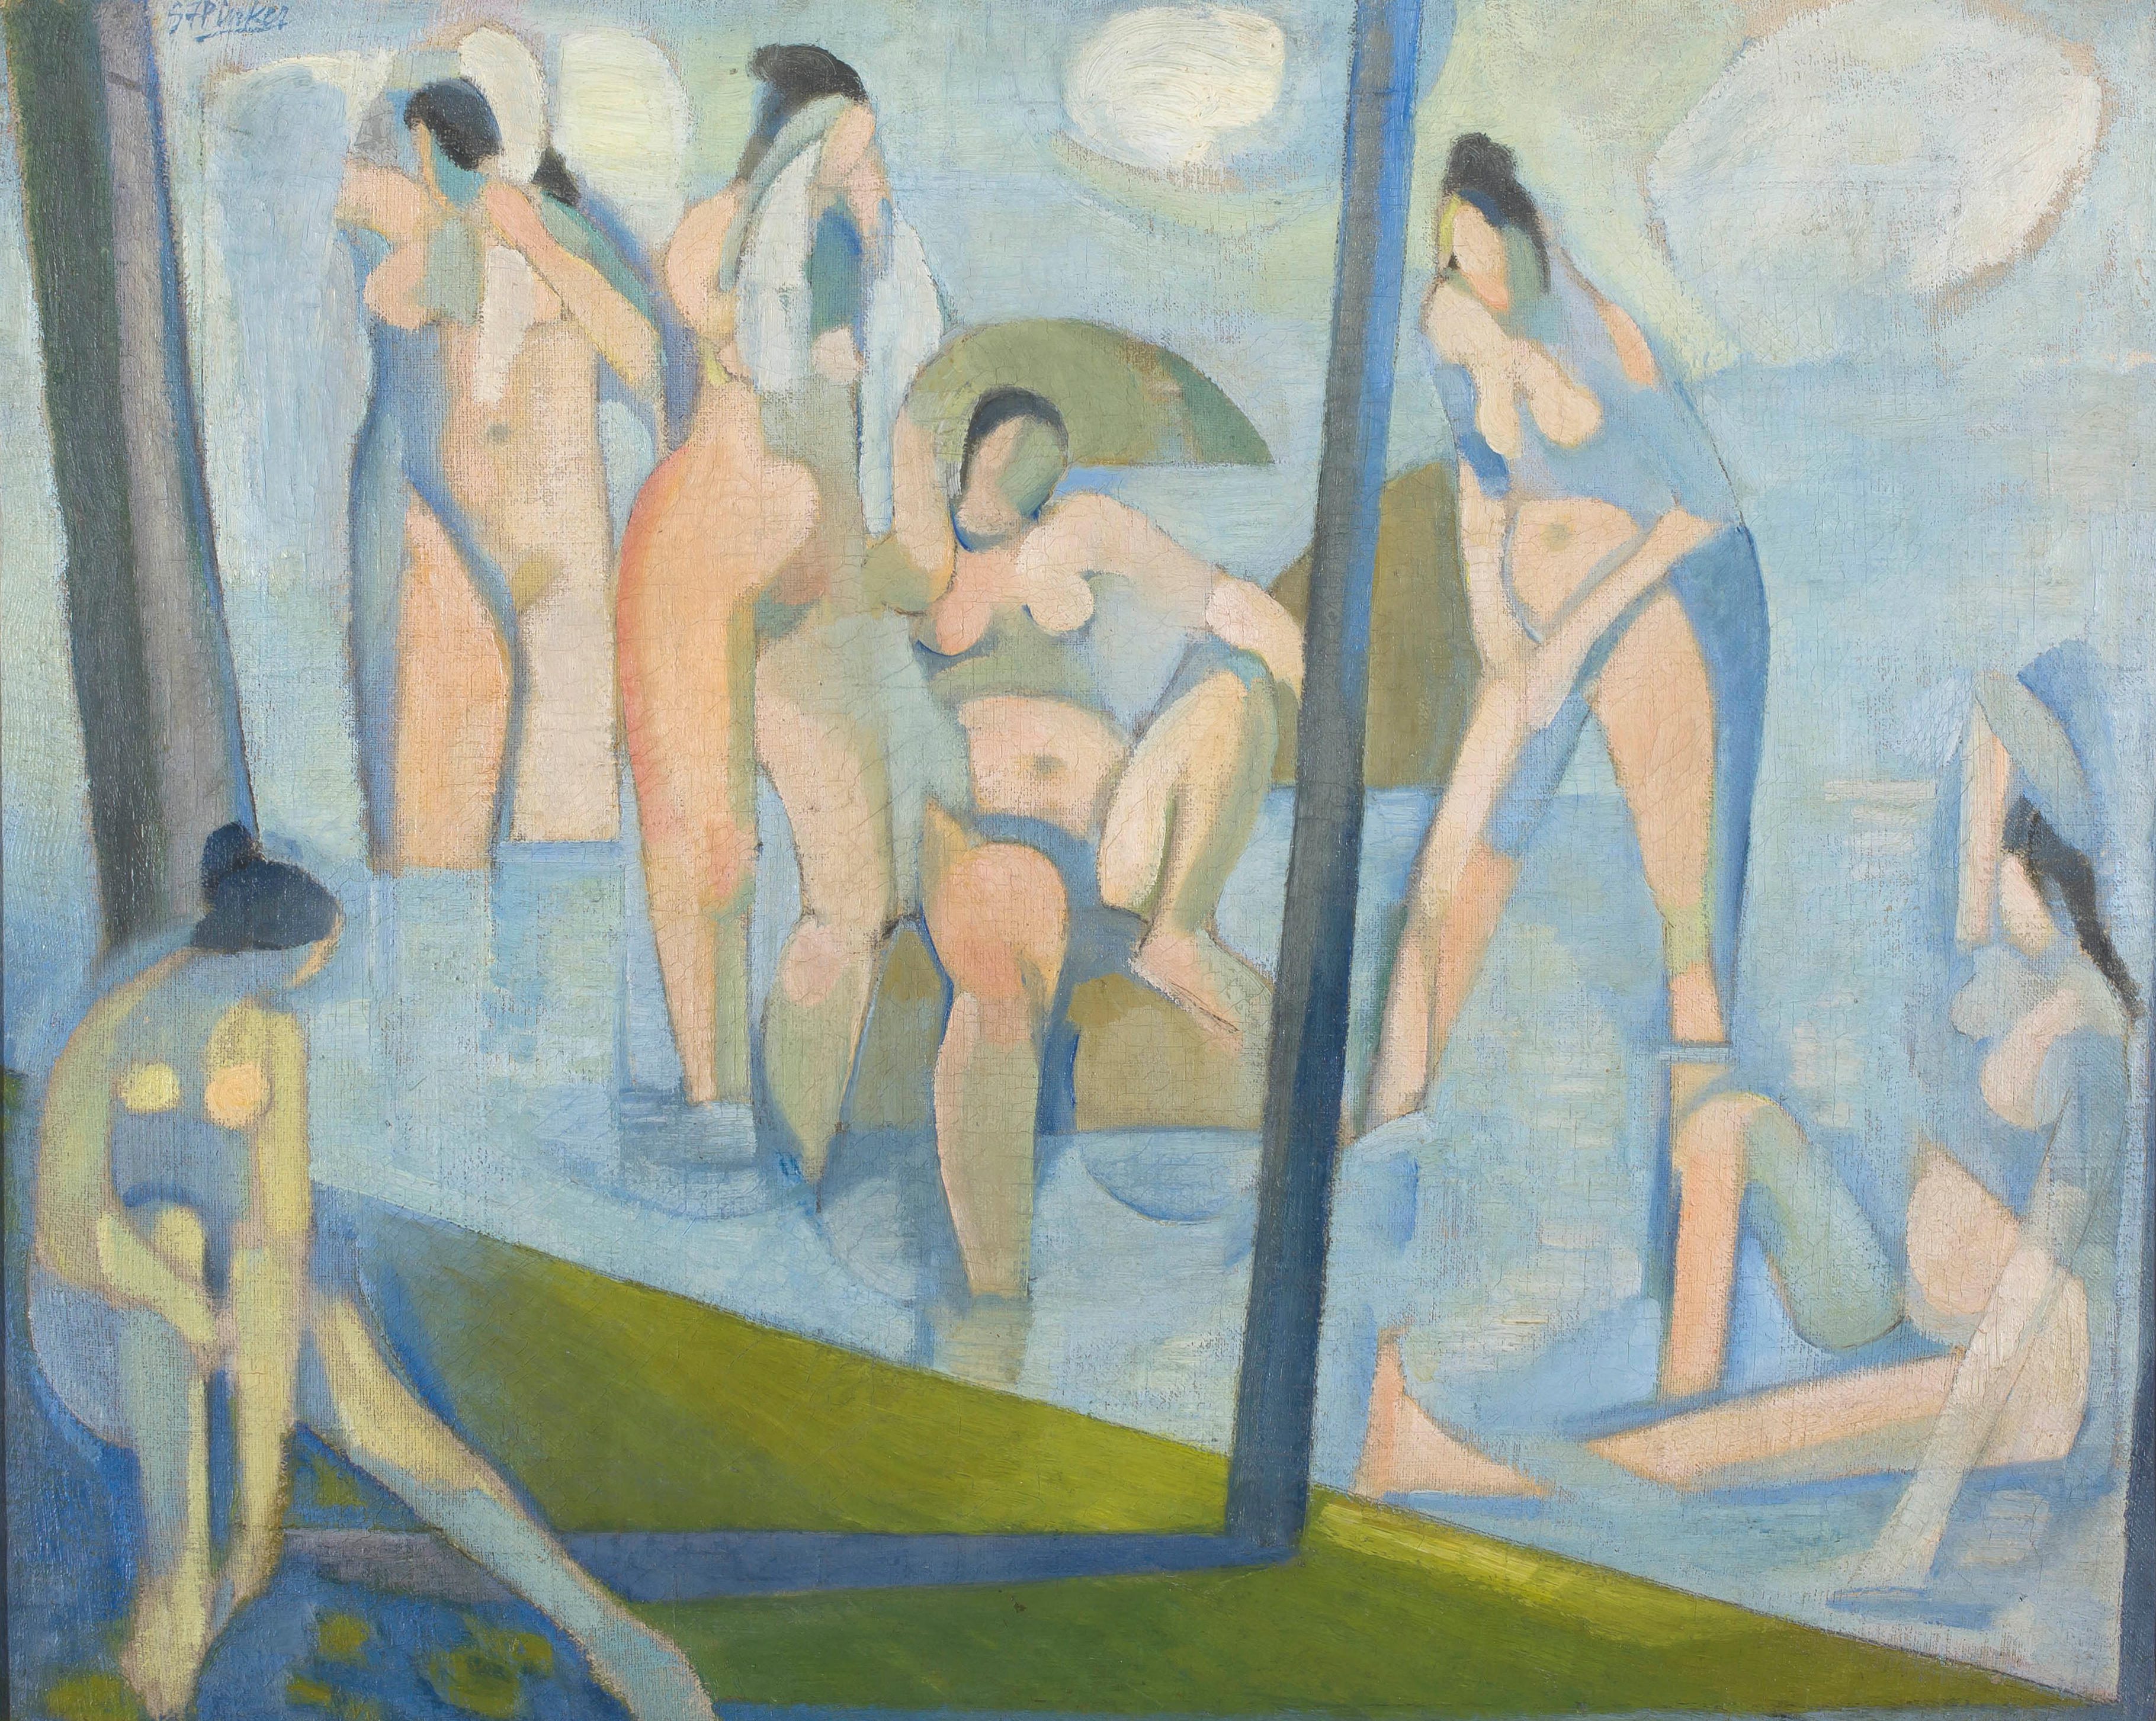 Stanley Pinker; The Bathers